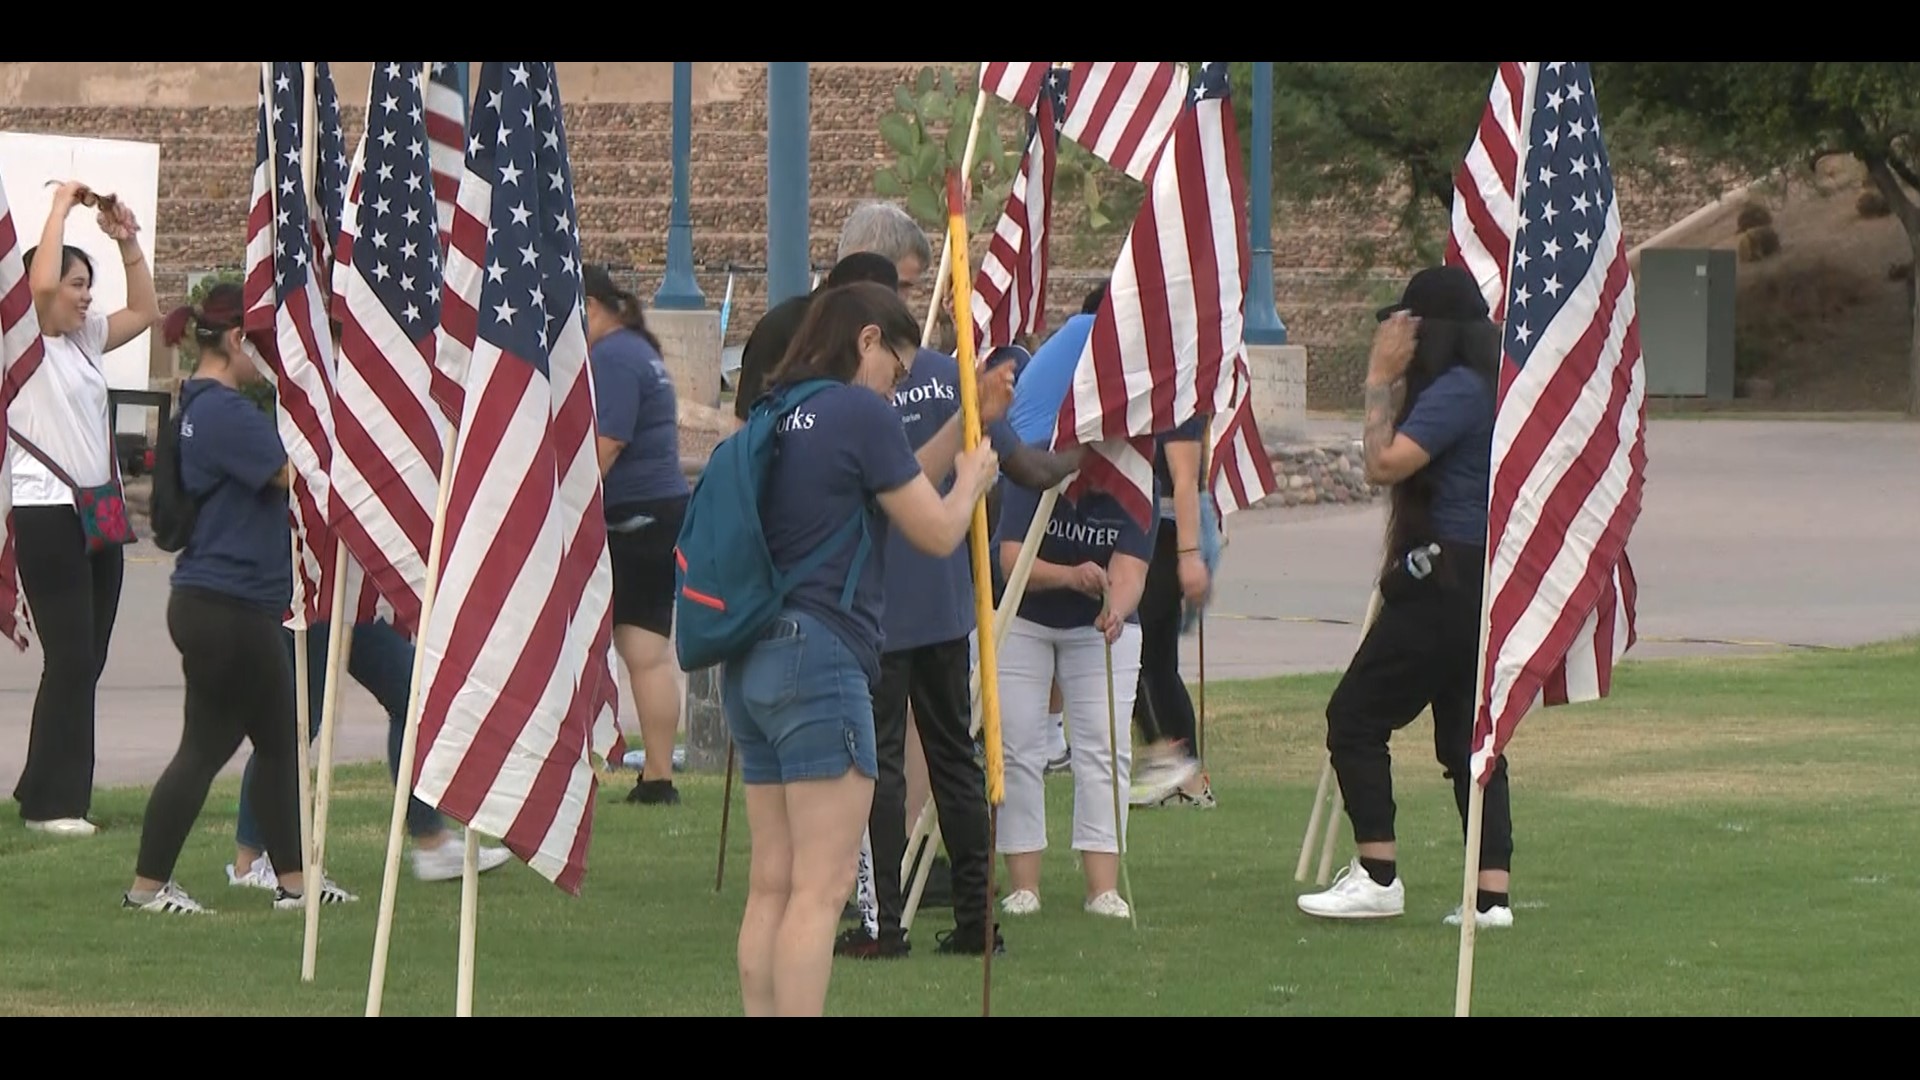 In memory of those who died that day, Tempe Beach Park is being transformed into the healing field this weekend.